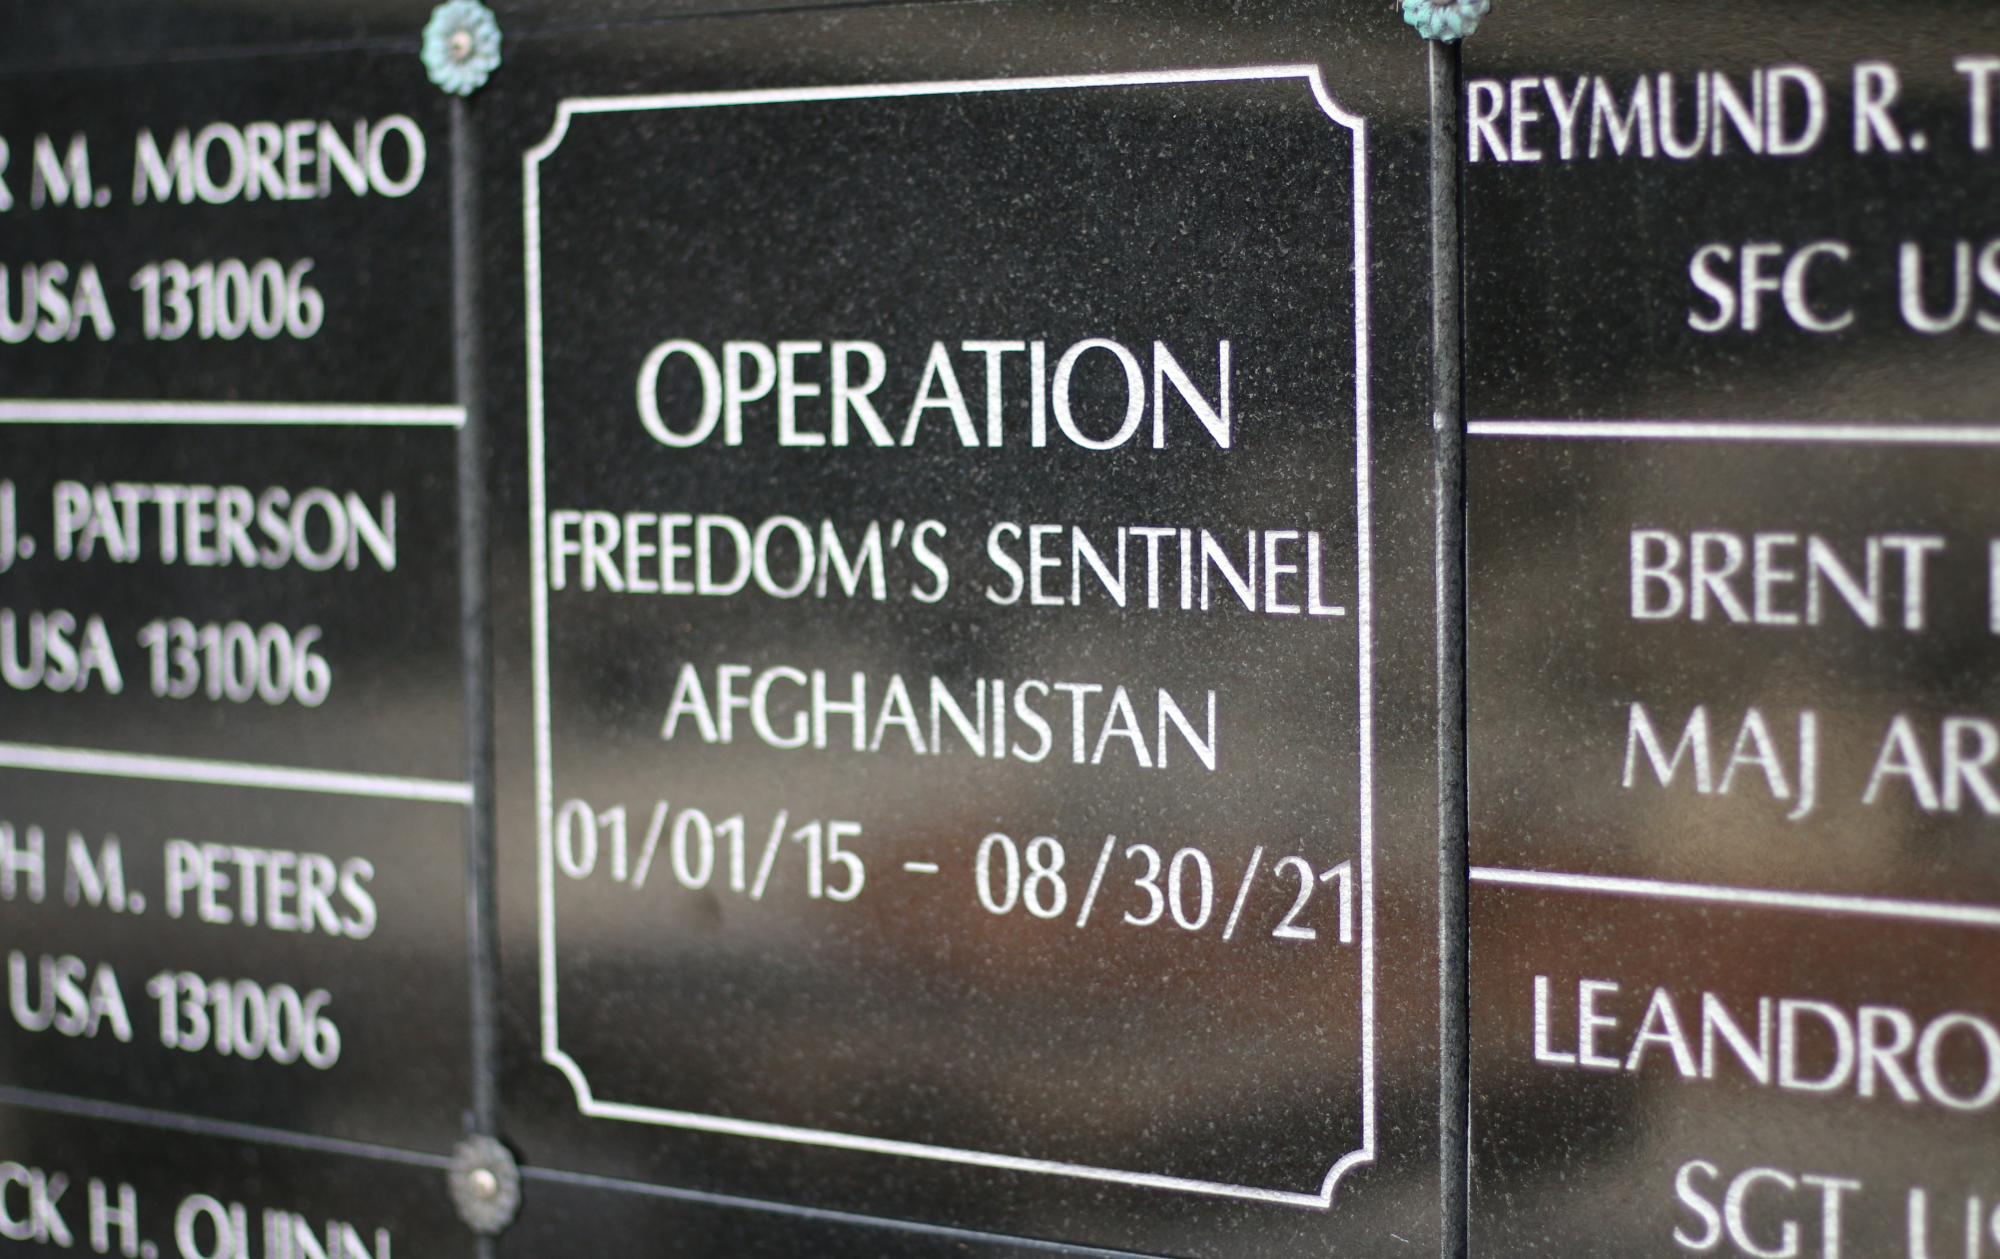 Views of the Special Operations Memorial